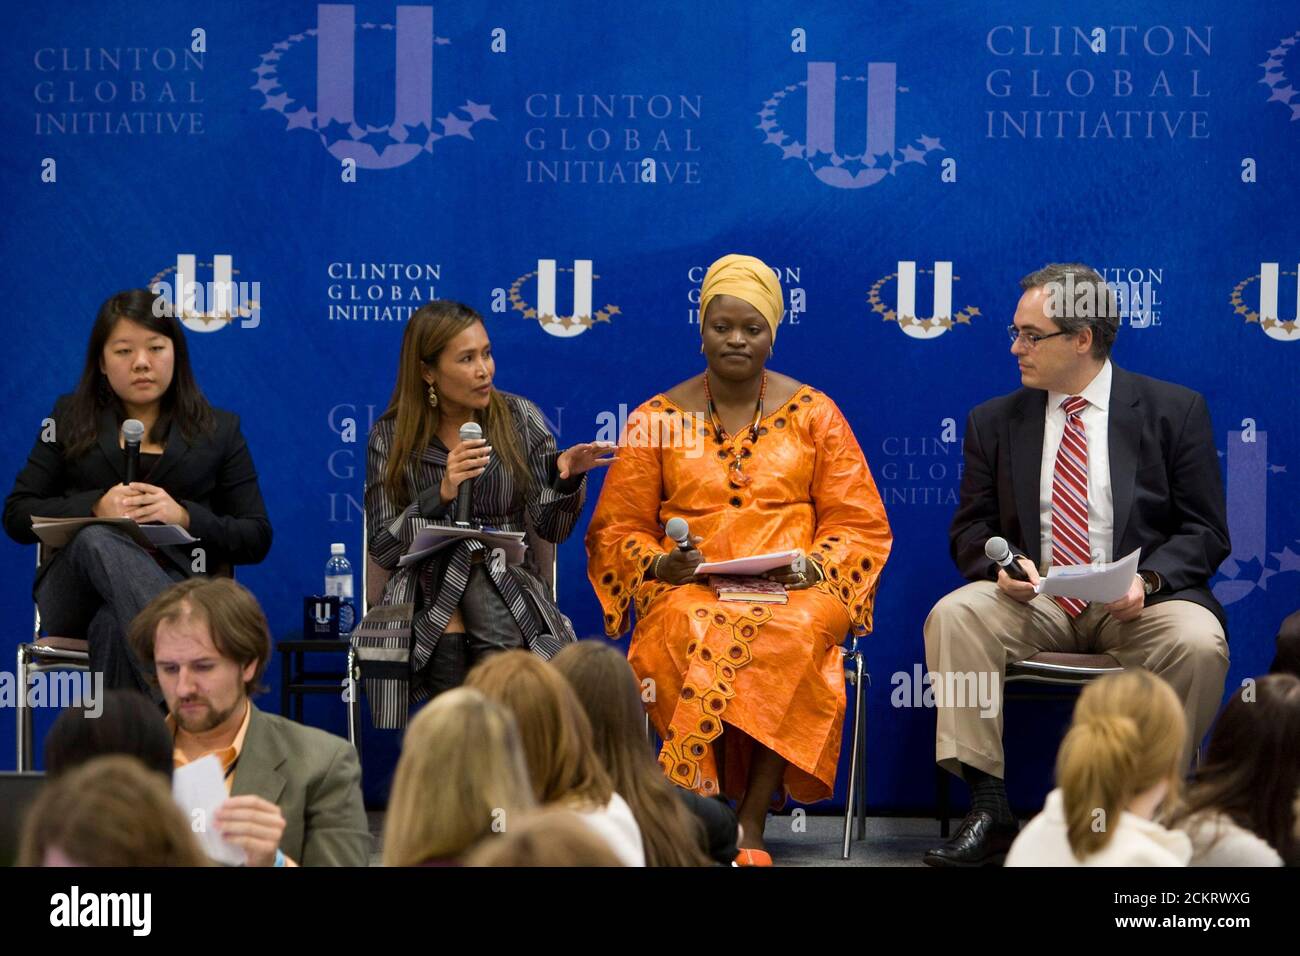 Austin, TX February 14, 2009: A working session on women's Peace and Human Rights for Women at the second-annual Clinton Global Initiative University, a conference bringing together students to take action on global challenges such as poverty, hunger, energy, climate change and global health. The program is patterned after Clinton Global Initiative Foundation formed by President Bill Clinton.  ©Bob Daemmrich Stock Photo